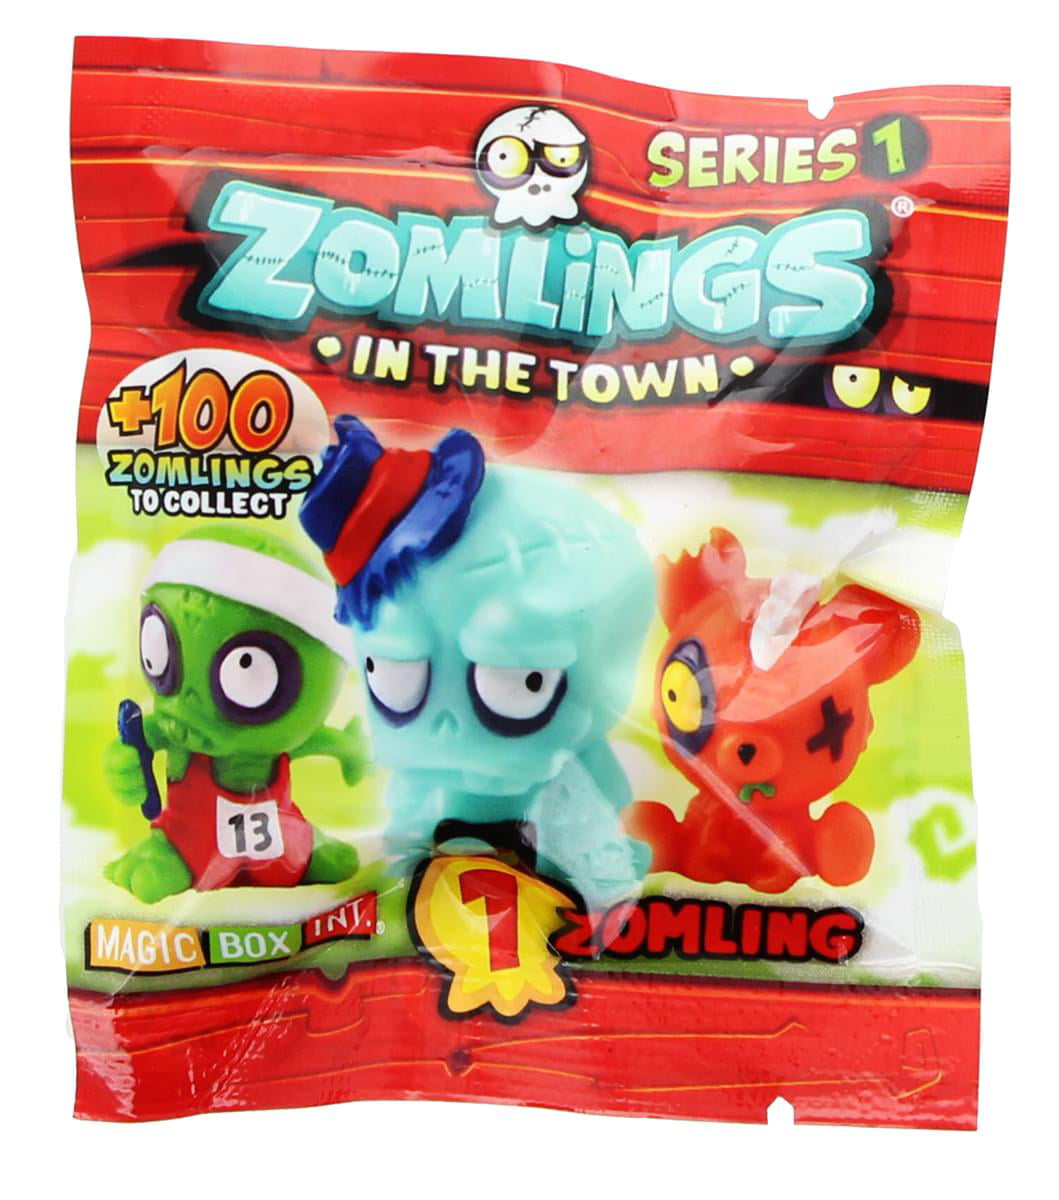 Zomlings Series 1 Ultra Rare In The Town New and Factory Sealed Free Shipping 